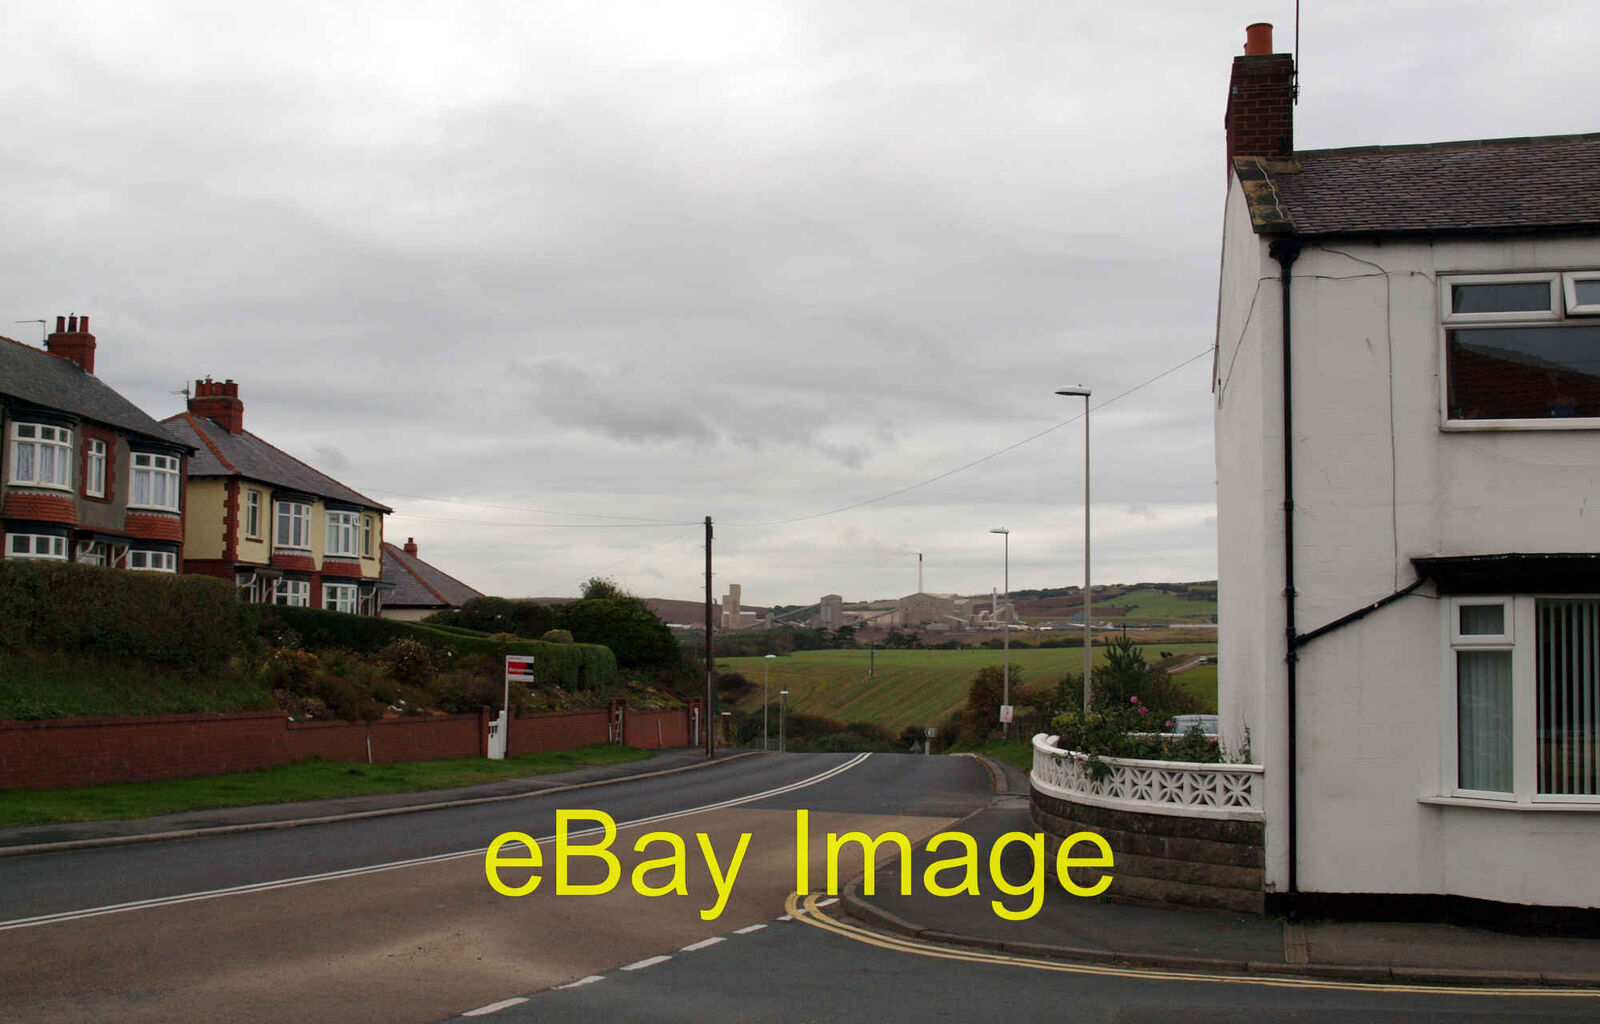 Photo 12x8 Whitby Road (A174) at its junction with Staithes Lane, Staithes c2010